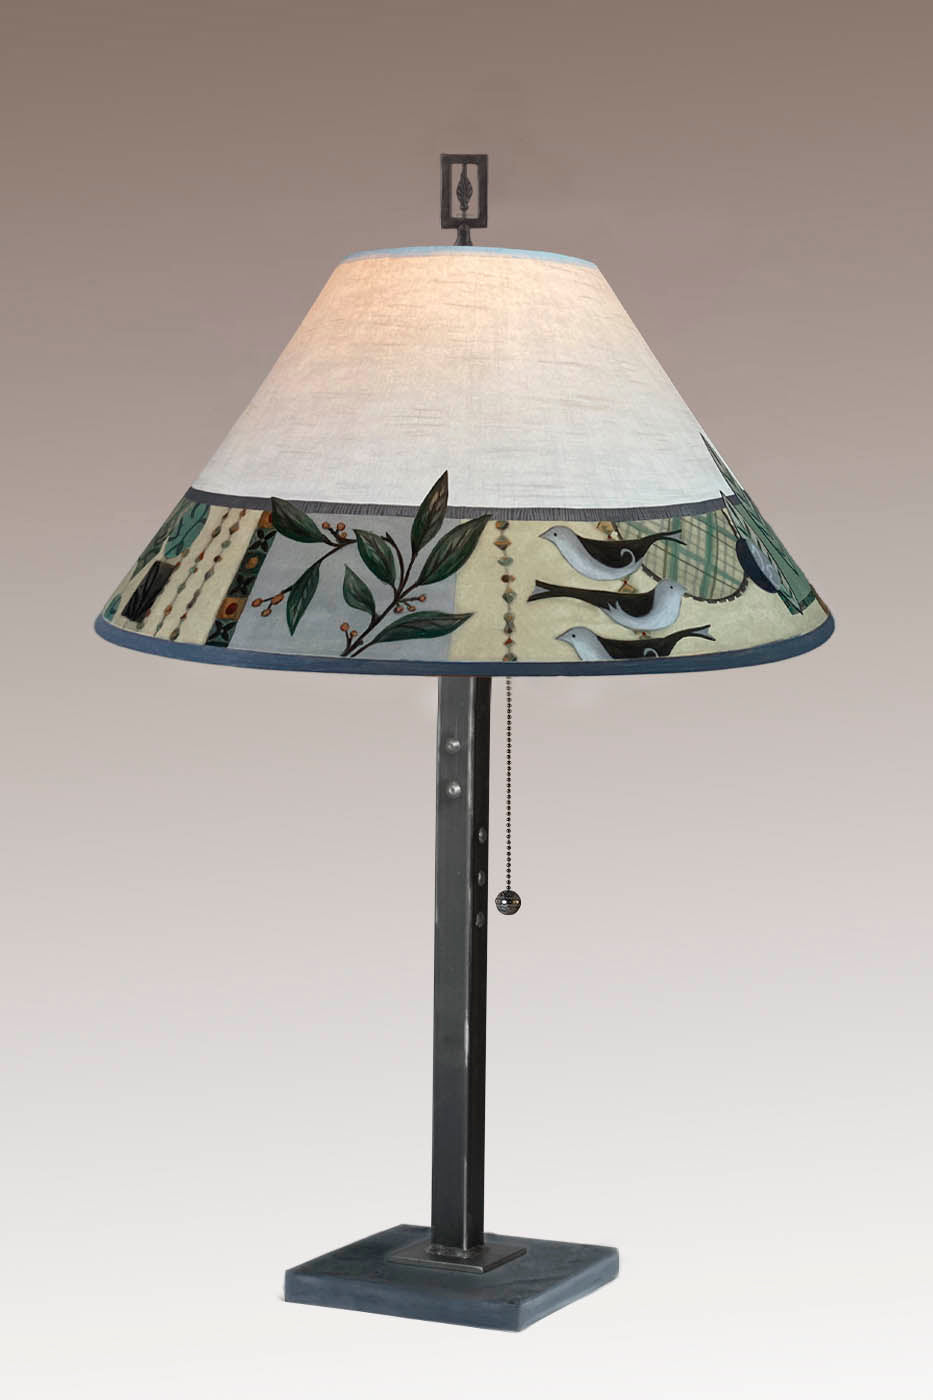 Janna Ugone &amp; Co Table Lamp Steel Table Lamp with Large Conical Shade in New Capri Opal